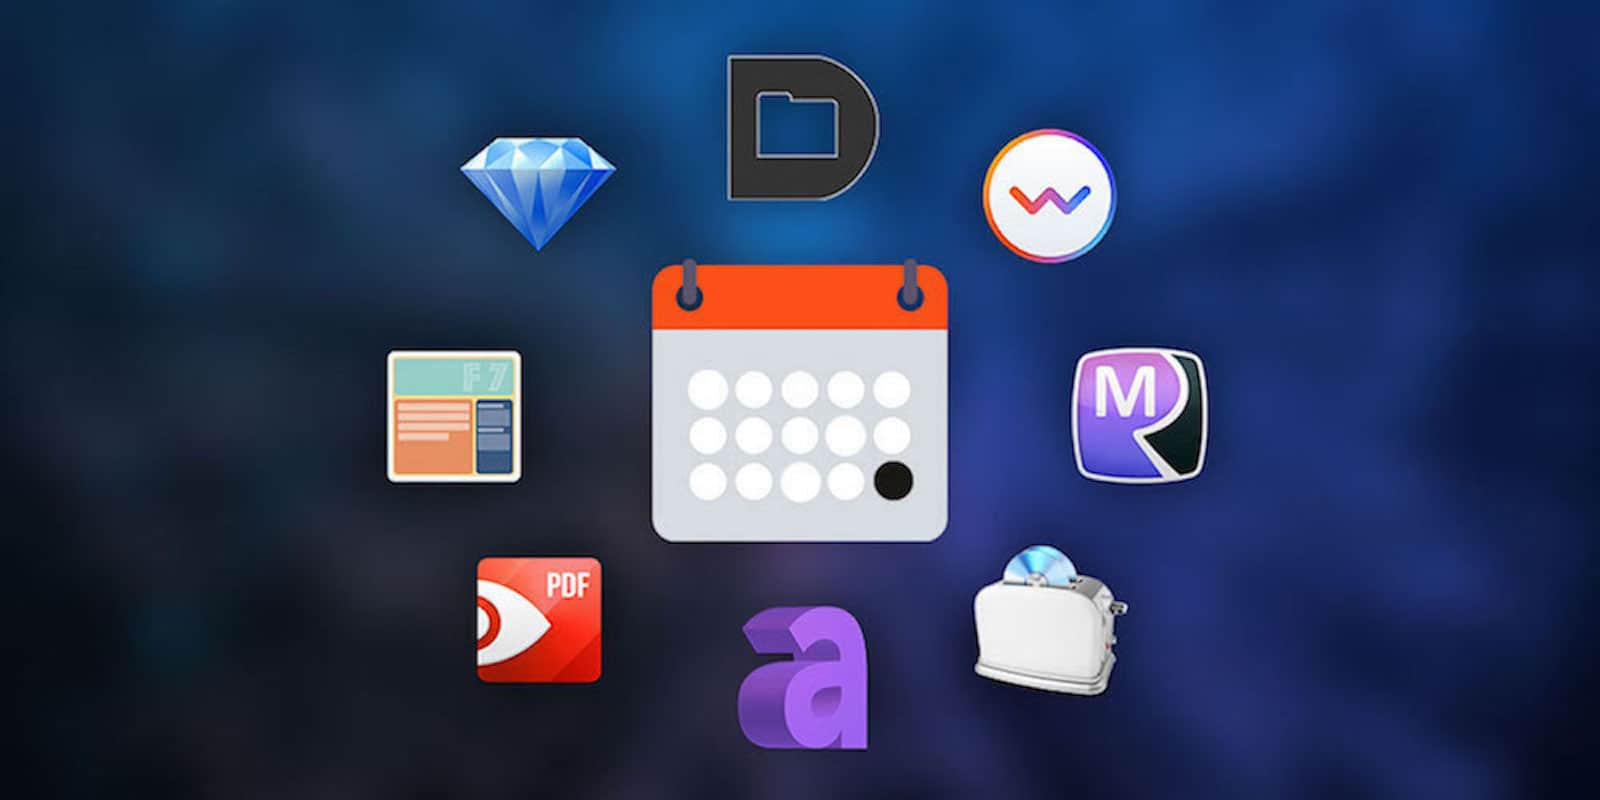 Upgrade your Mac with a bunch of productivity and performance enhancing apps.